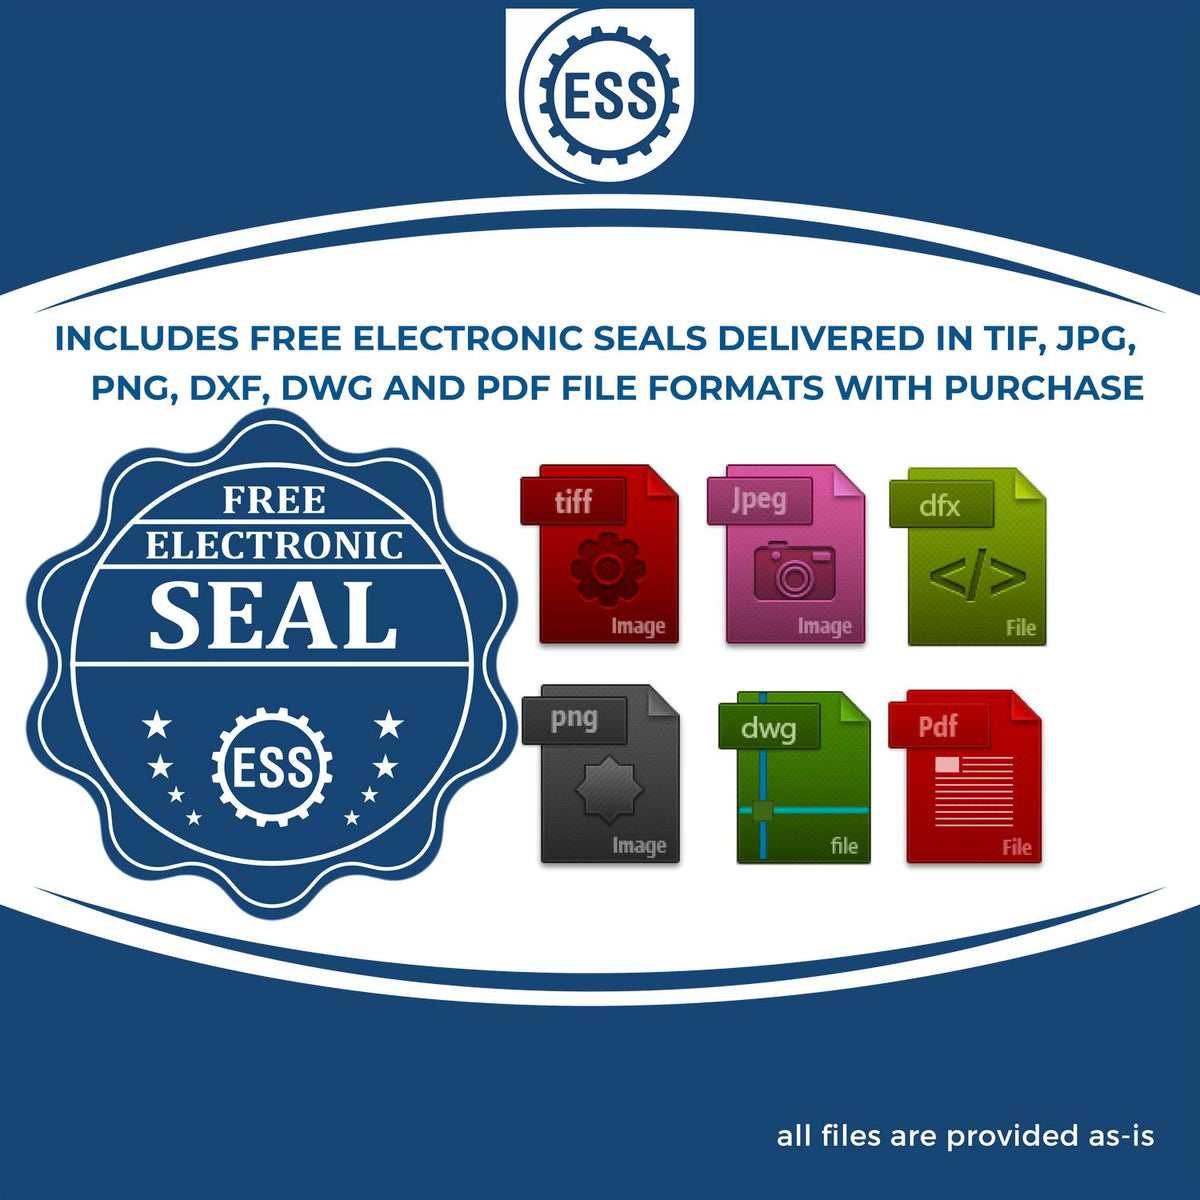 An infographic for the free electronic seal for the Wyoming Desk Architect Embossing Seal illustrating the different file type icons such as DXF, DWG, TIF, JPG and PNG.